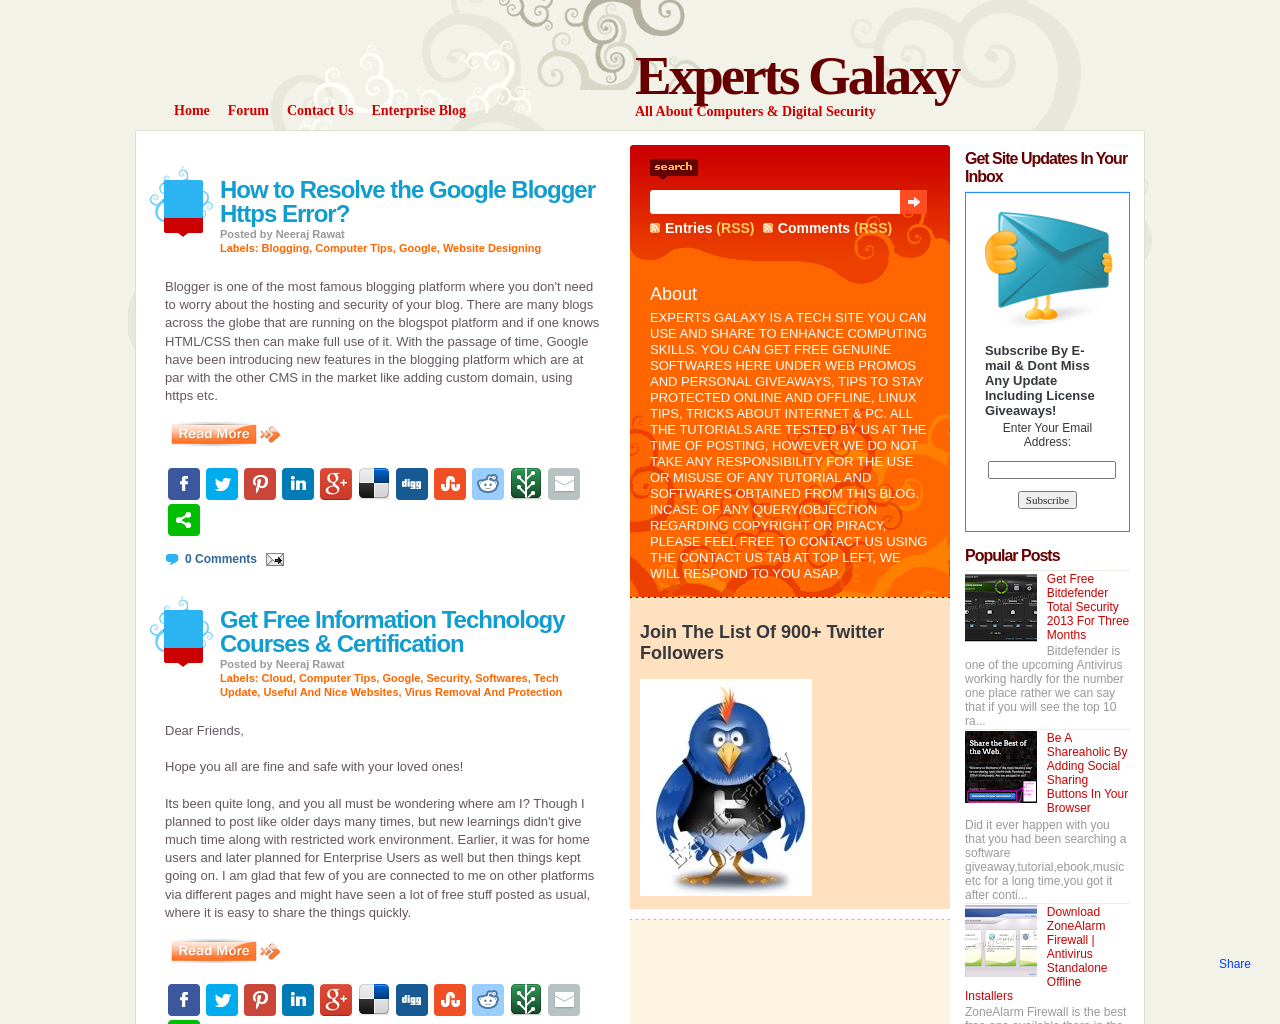 Experts Galaxy - All About Computers & Digital Security